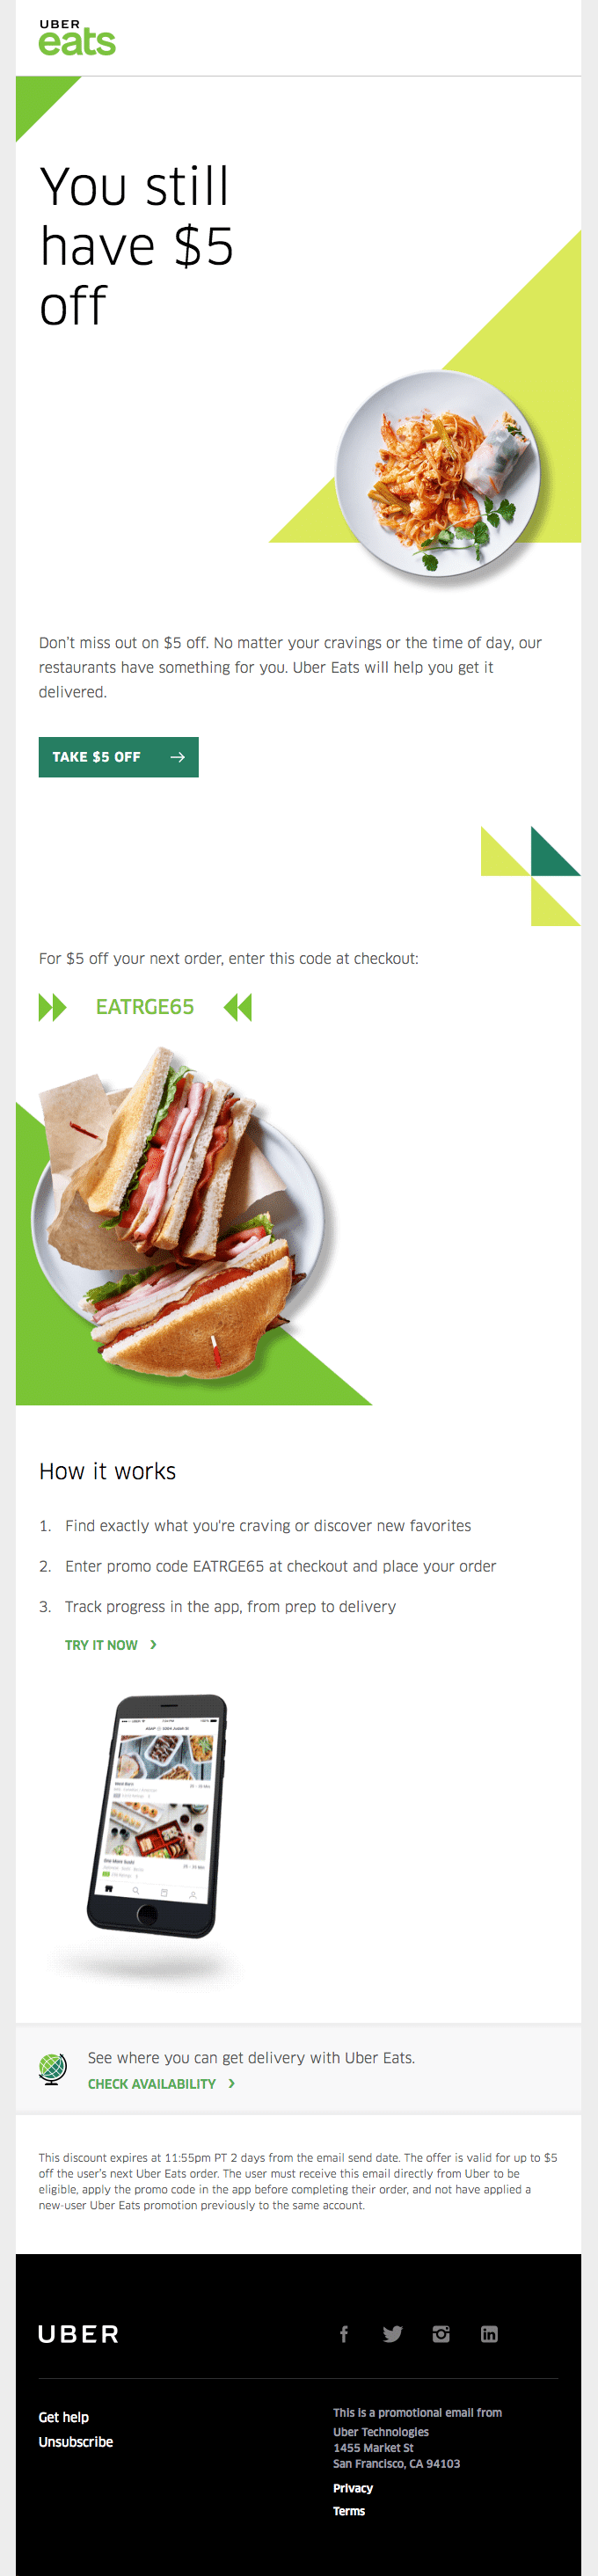 Uber Eats Discount Code Email Example